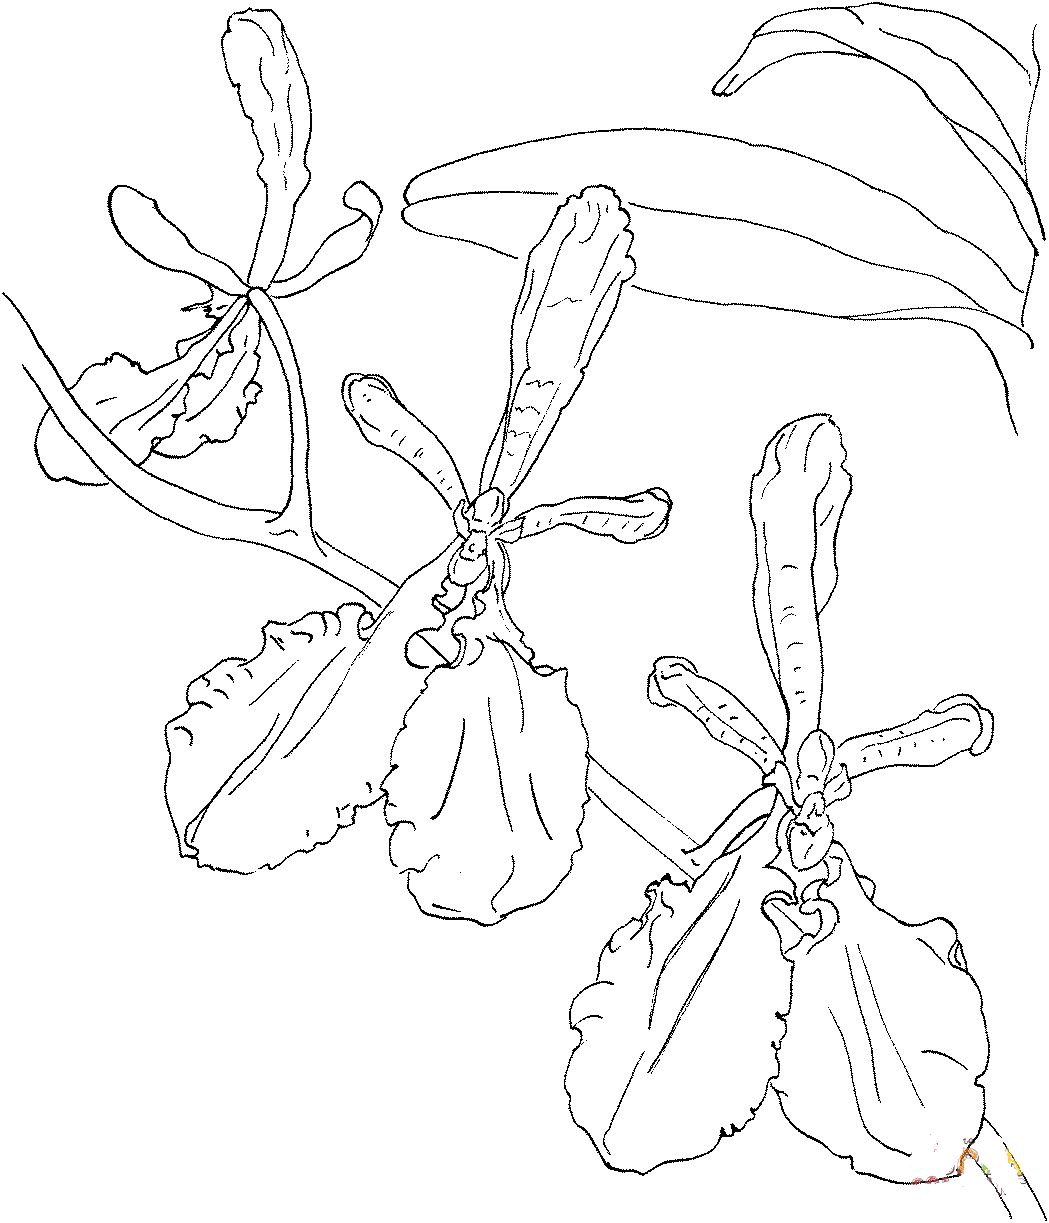 renanthera-imschootiana-orchid-coloring-page